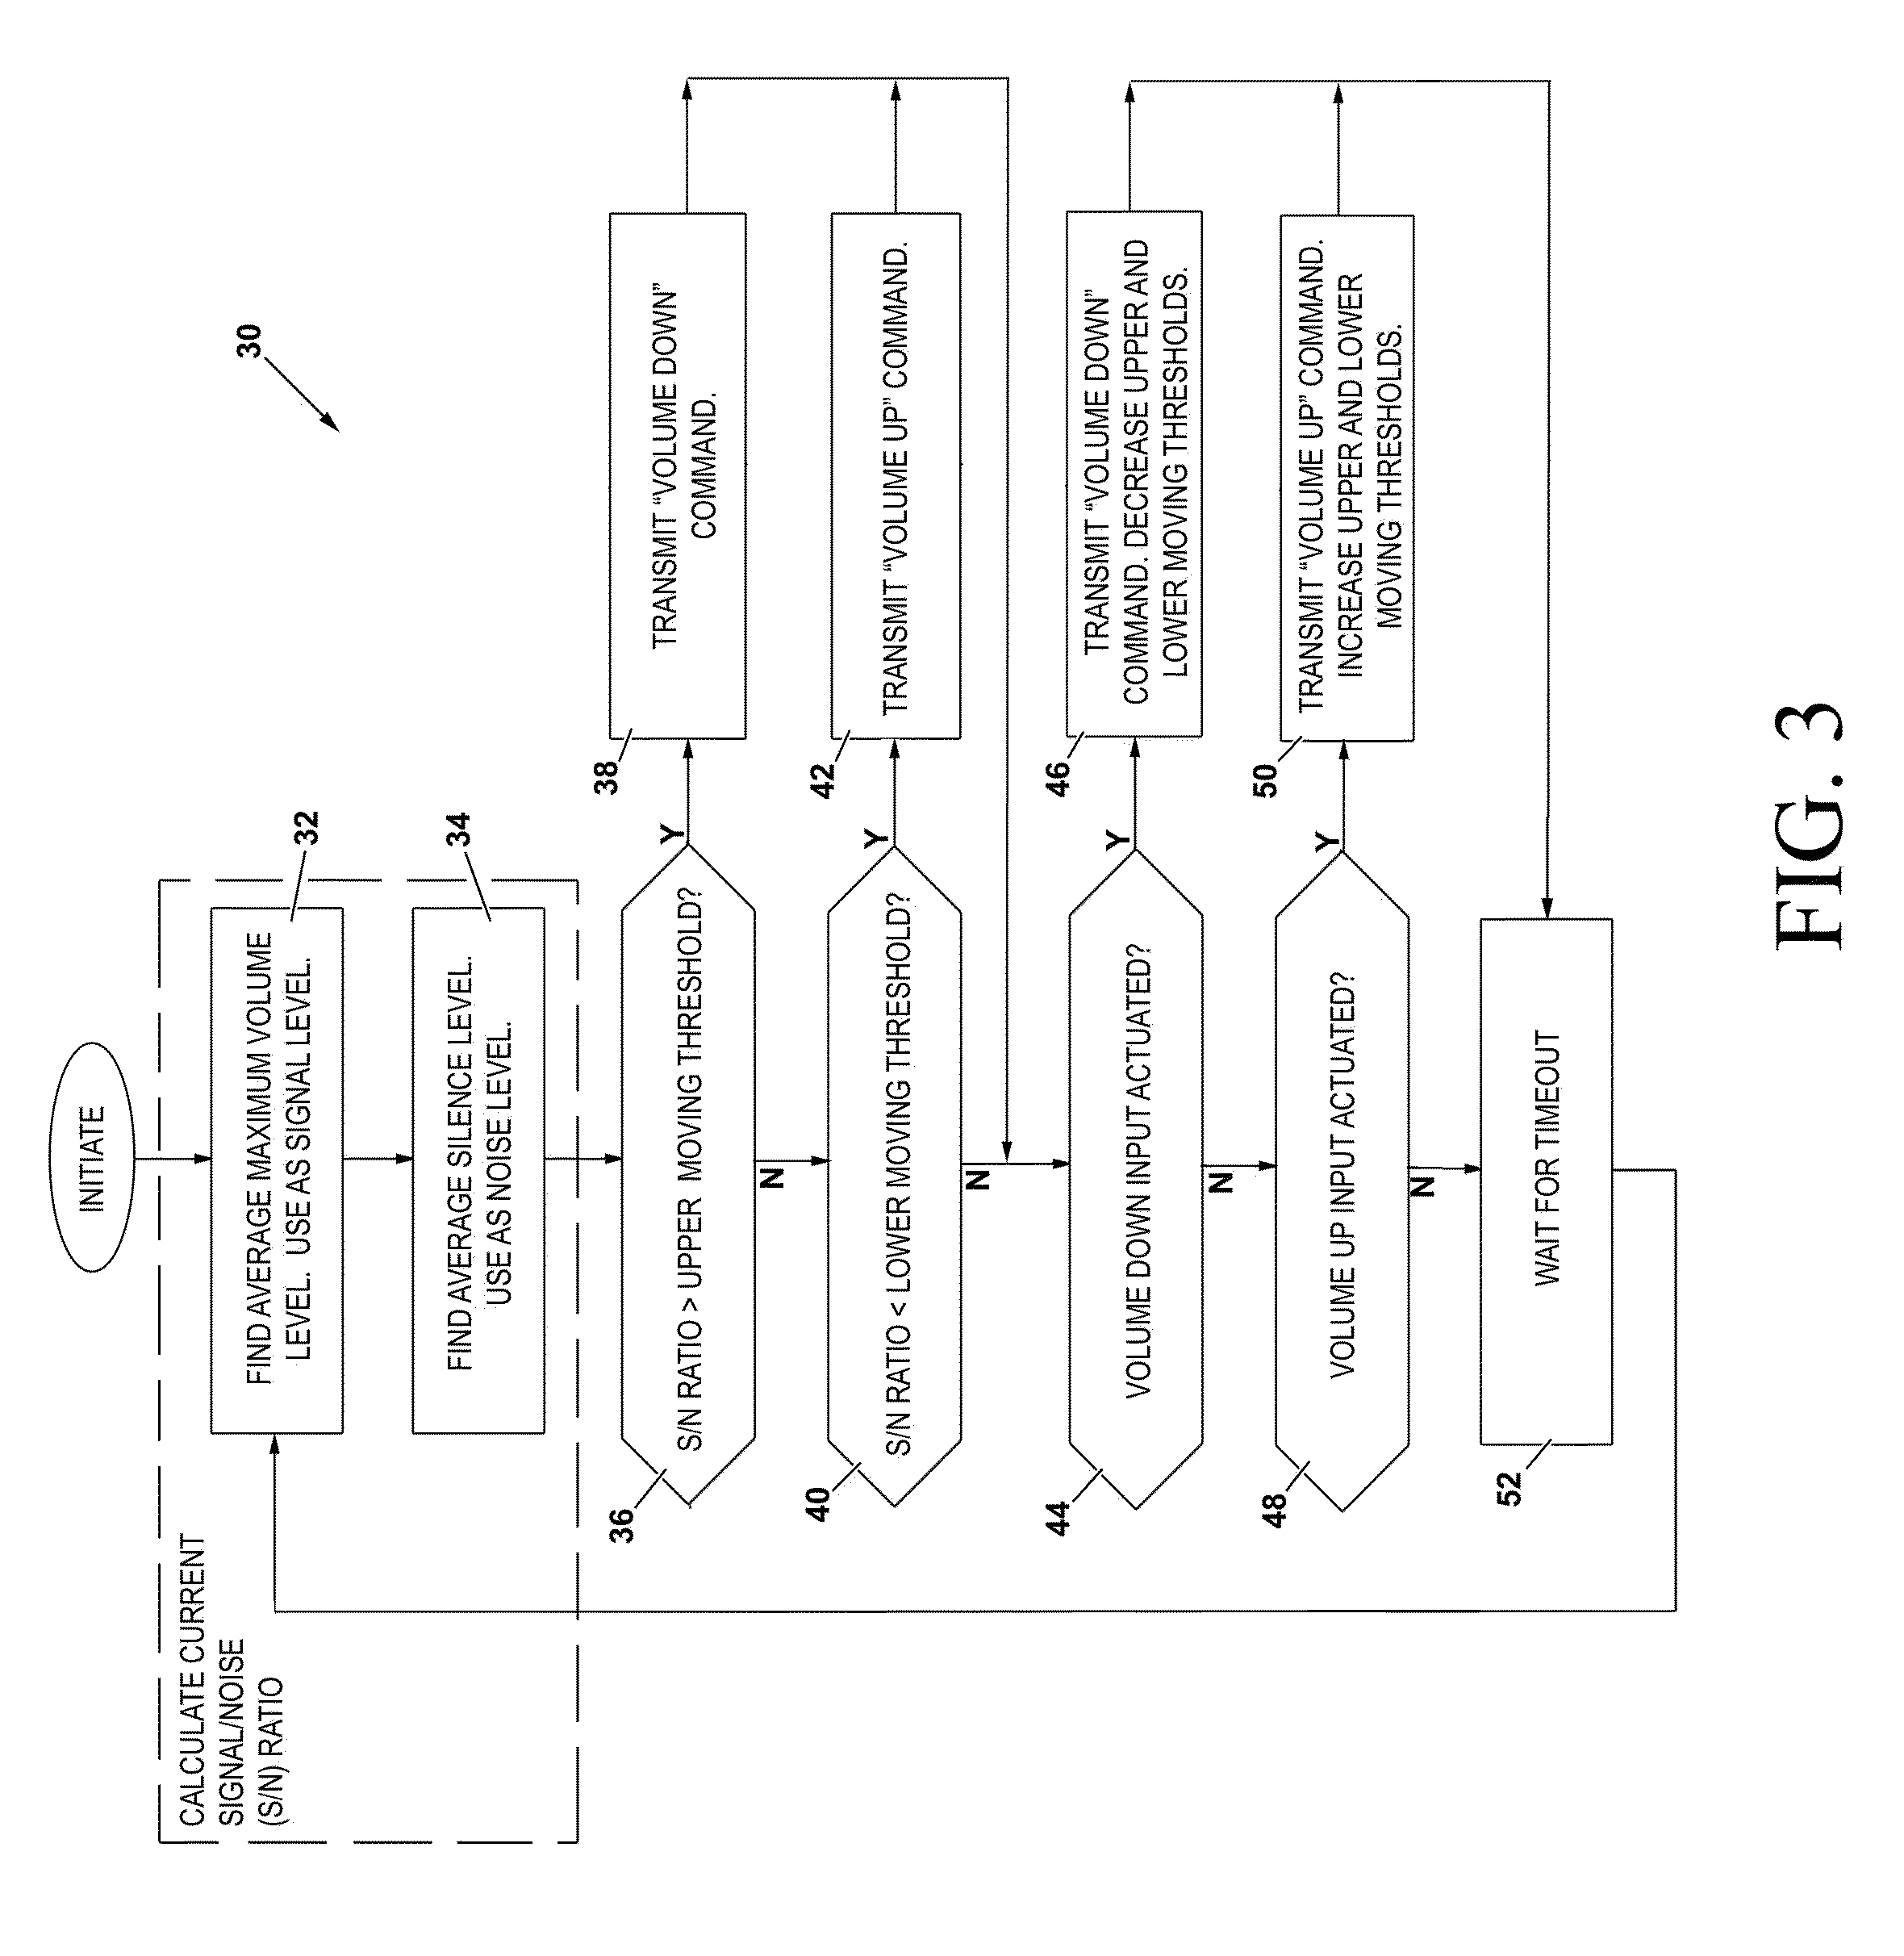 Remote control and method for automatically adjusting the volume output of an audio device